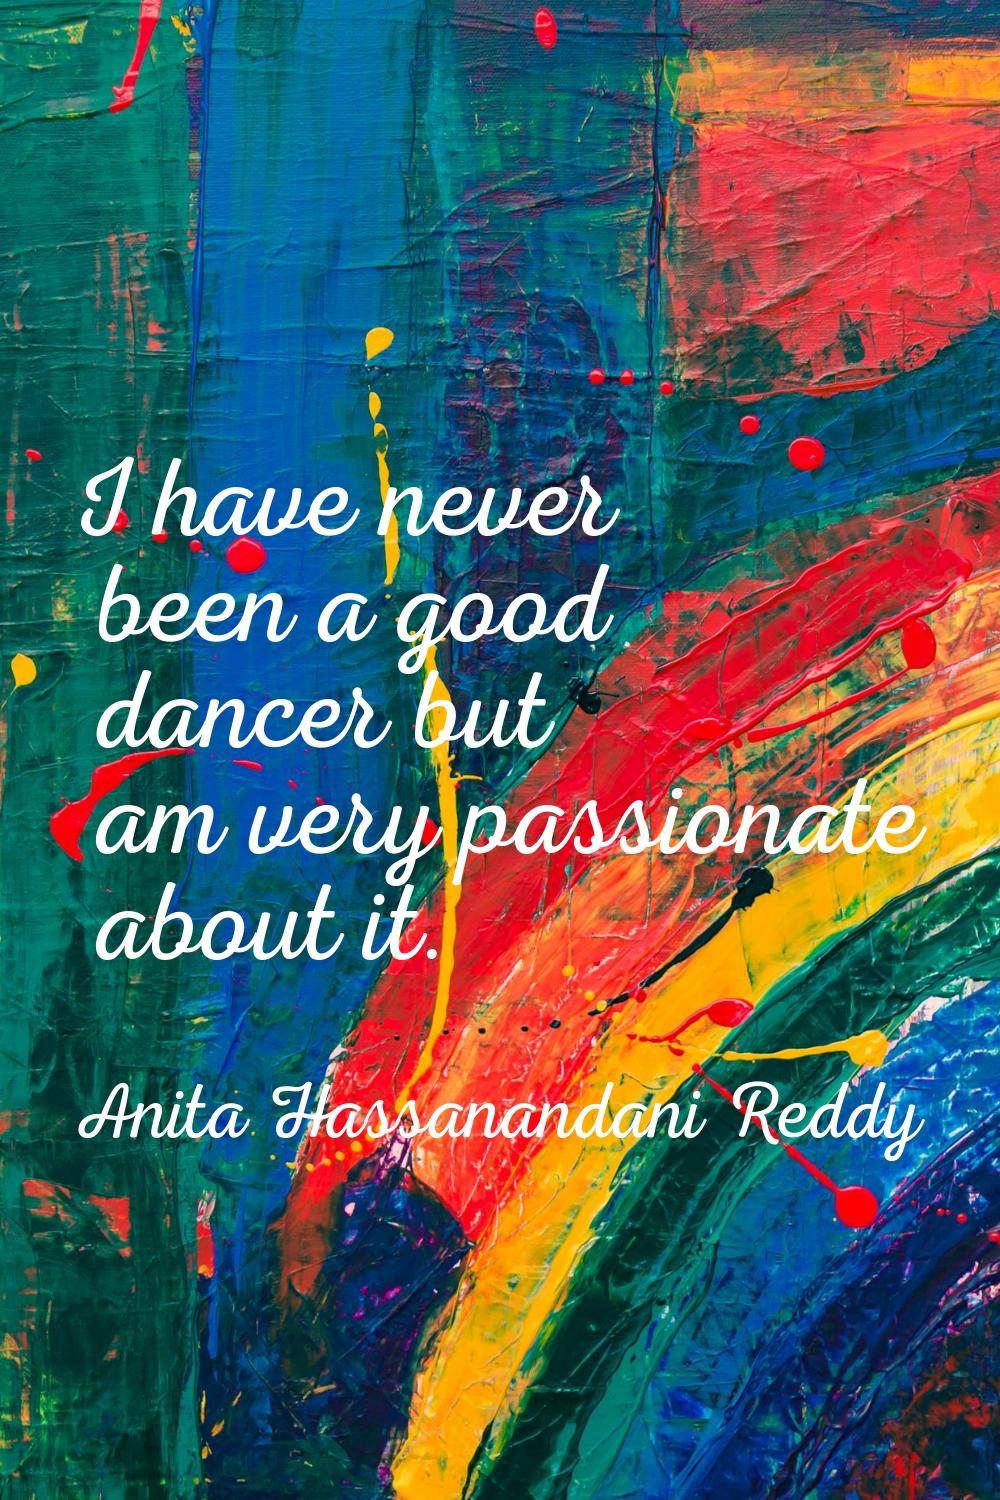 I have never been a good dancer but am very passionate about it.